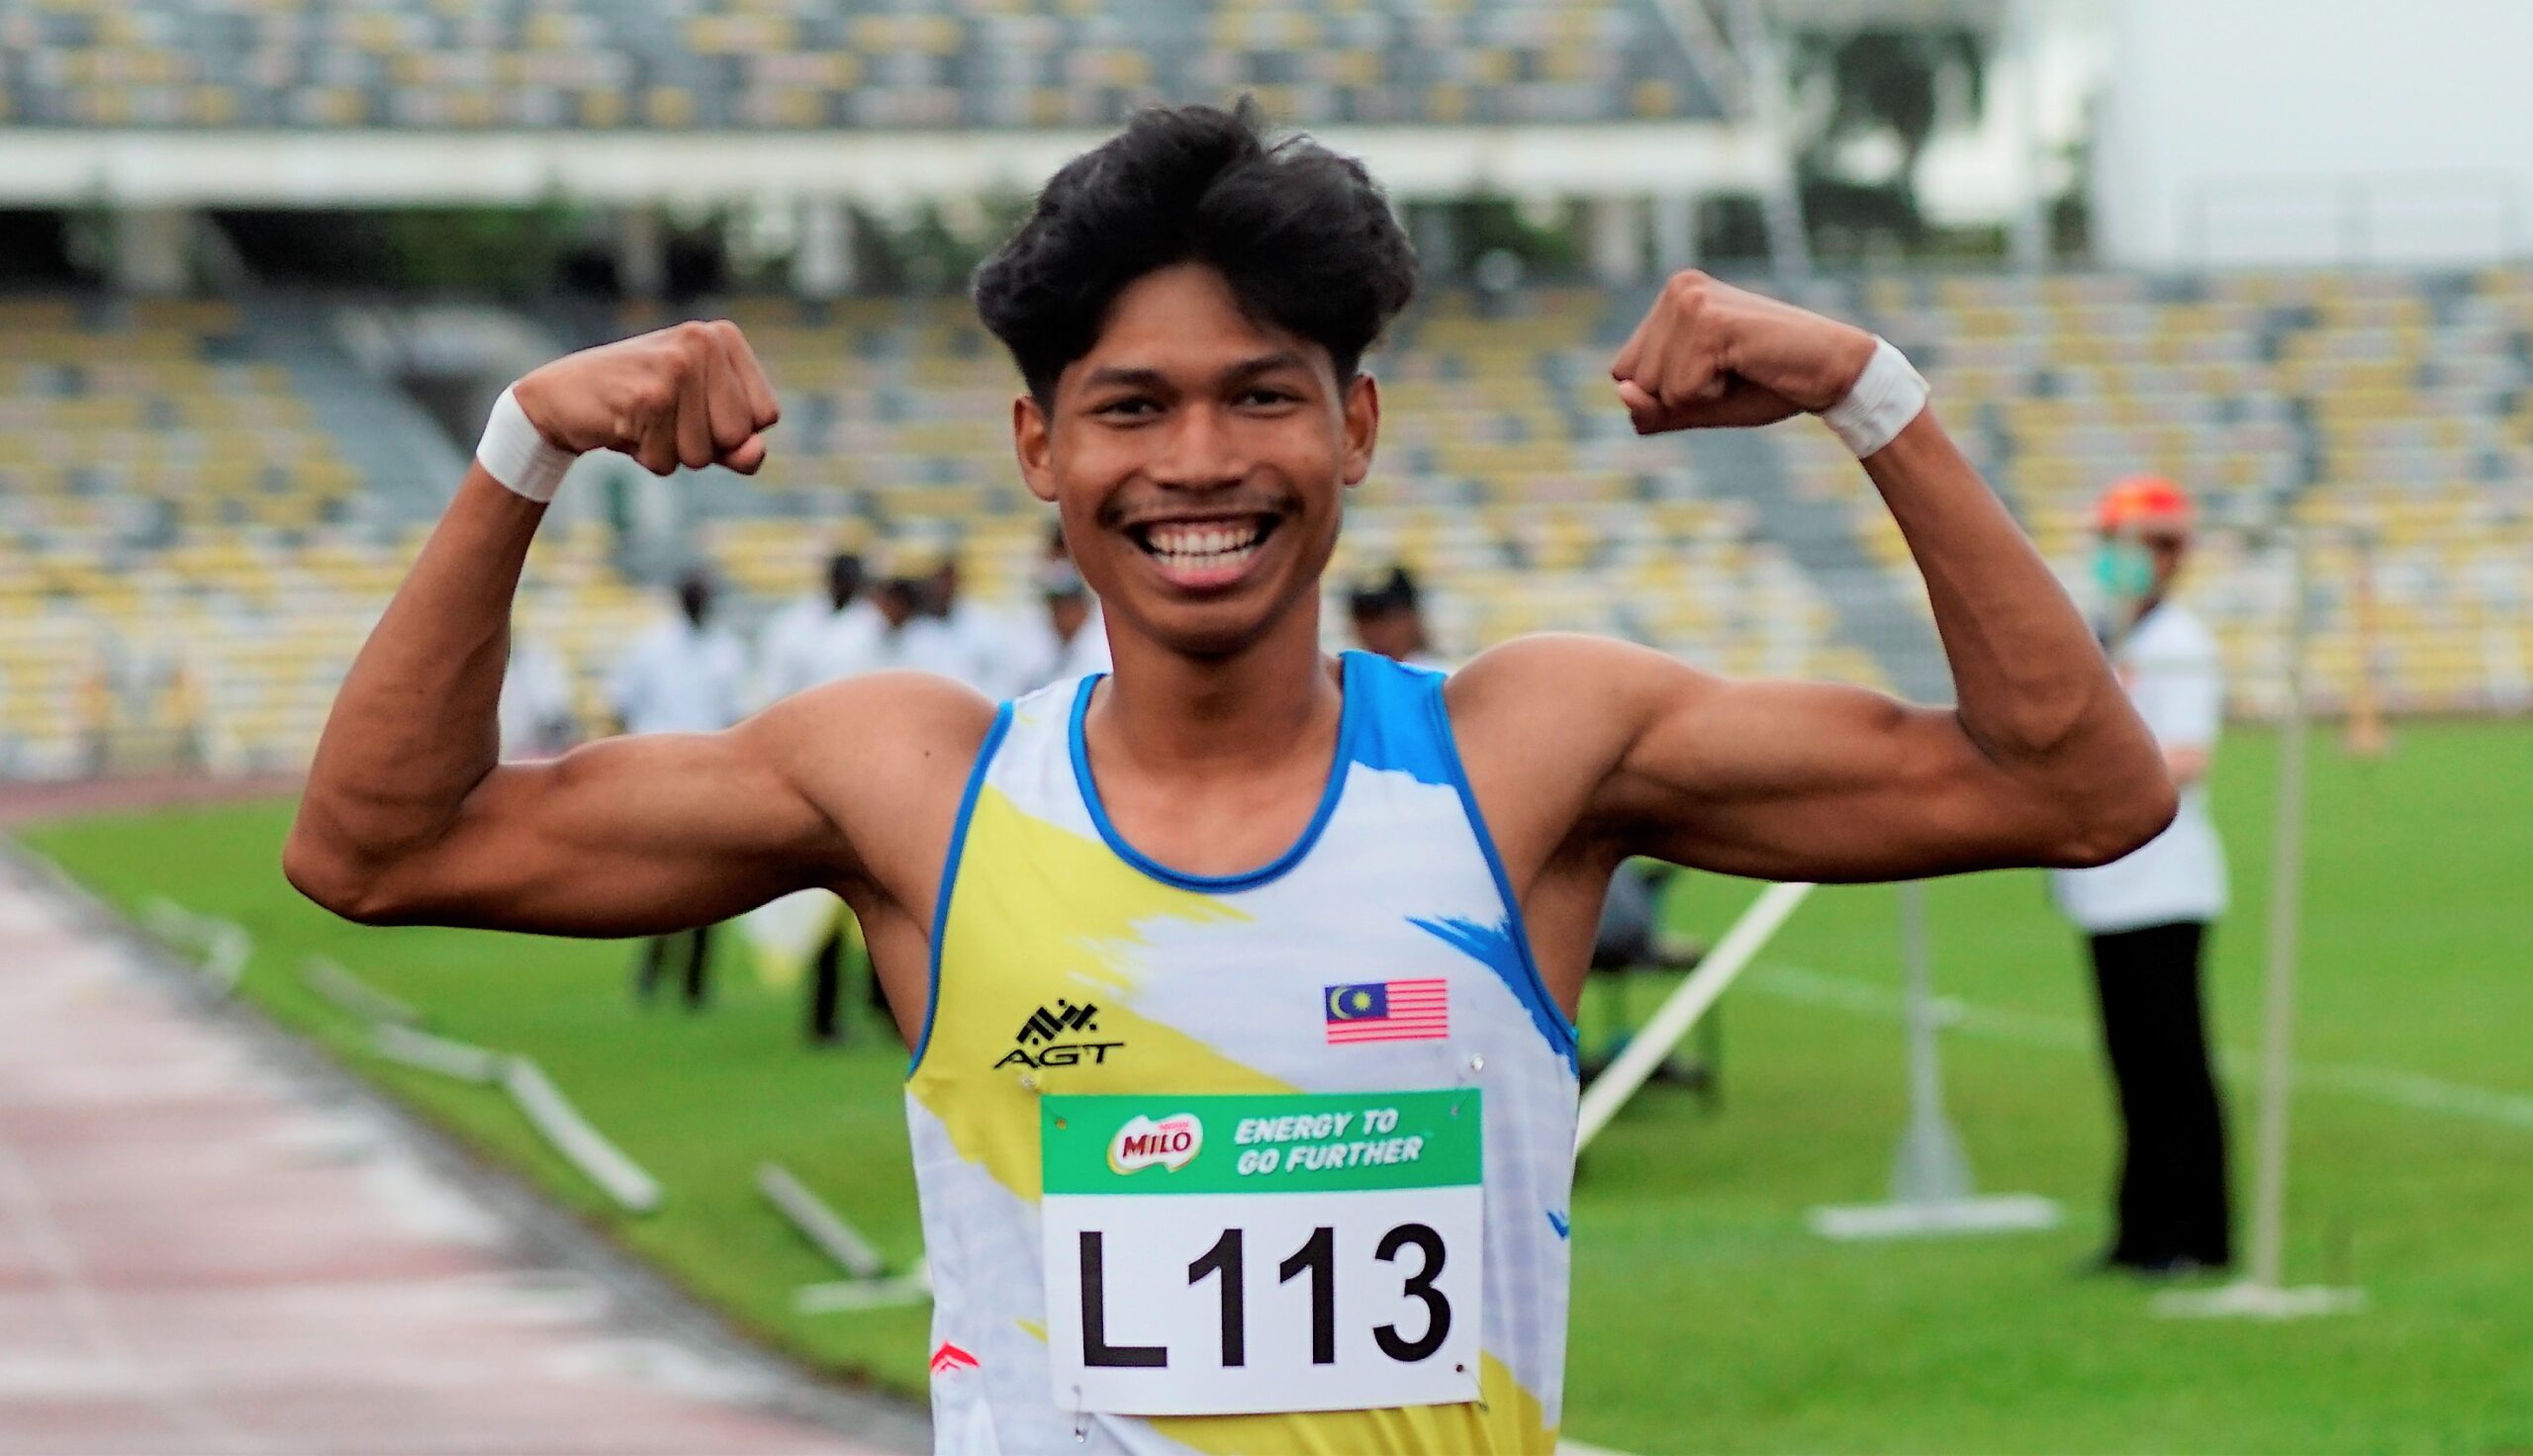 Azeem has just become the nation's latest record holder for the shortest ever time clocked for a 100-meter sprint. Image credit: Utusan Malaysia